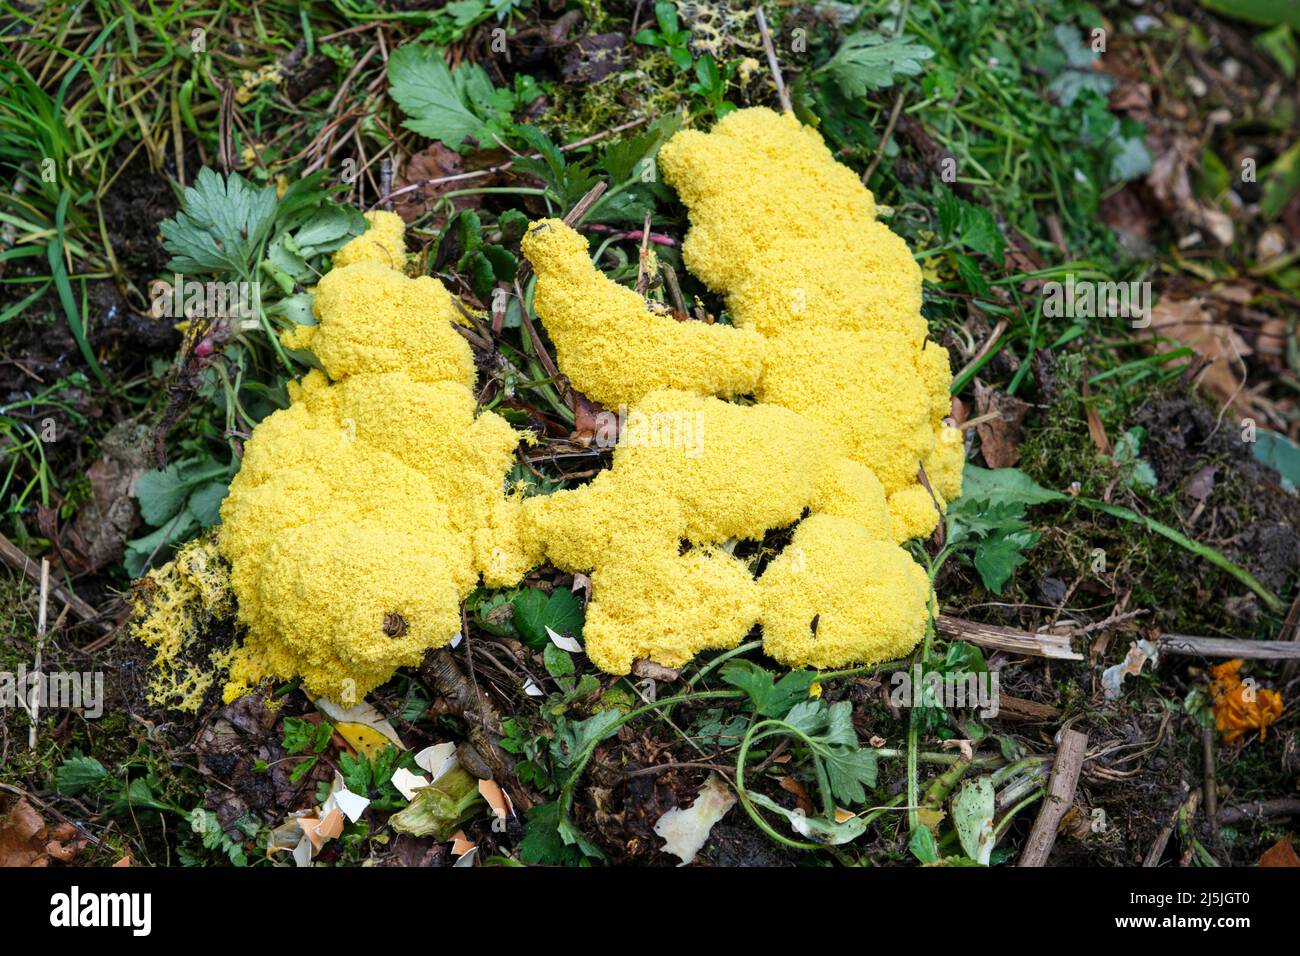 Dog's vomit slime mold (also known as scrambled egg slime or flowers of tan), Fuligo septica, growing on a compost heap Stock Photo